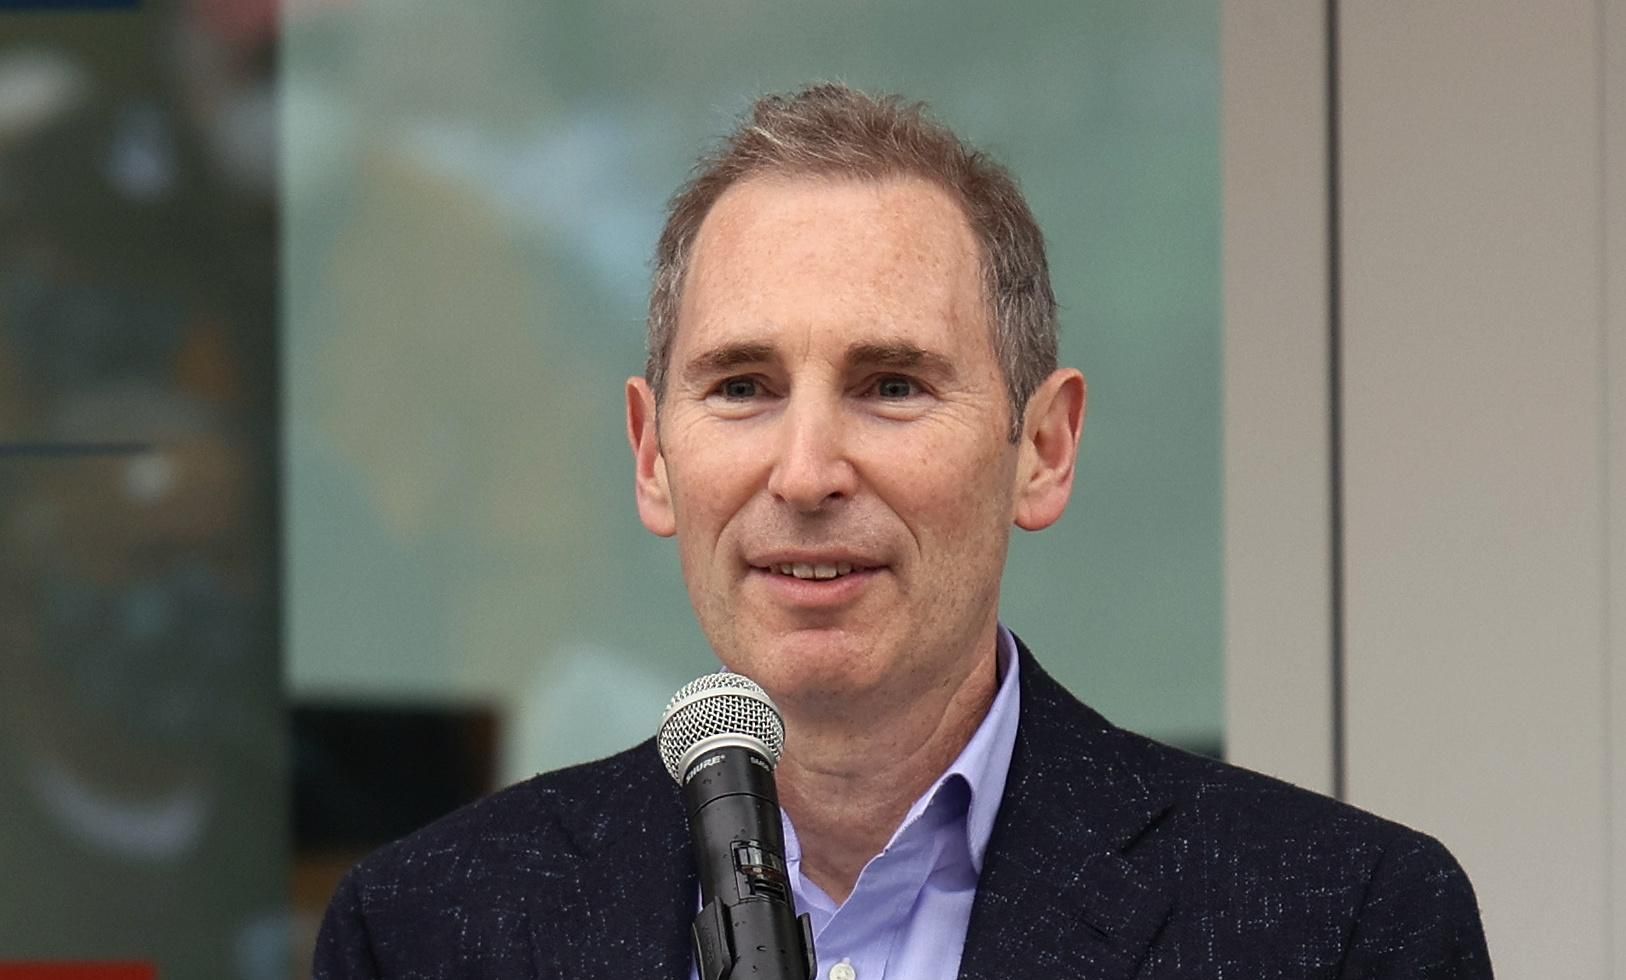 Amazon CEO Andy Jassy speaks at an event